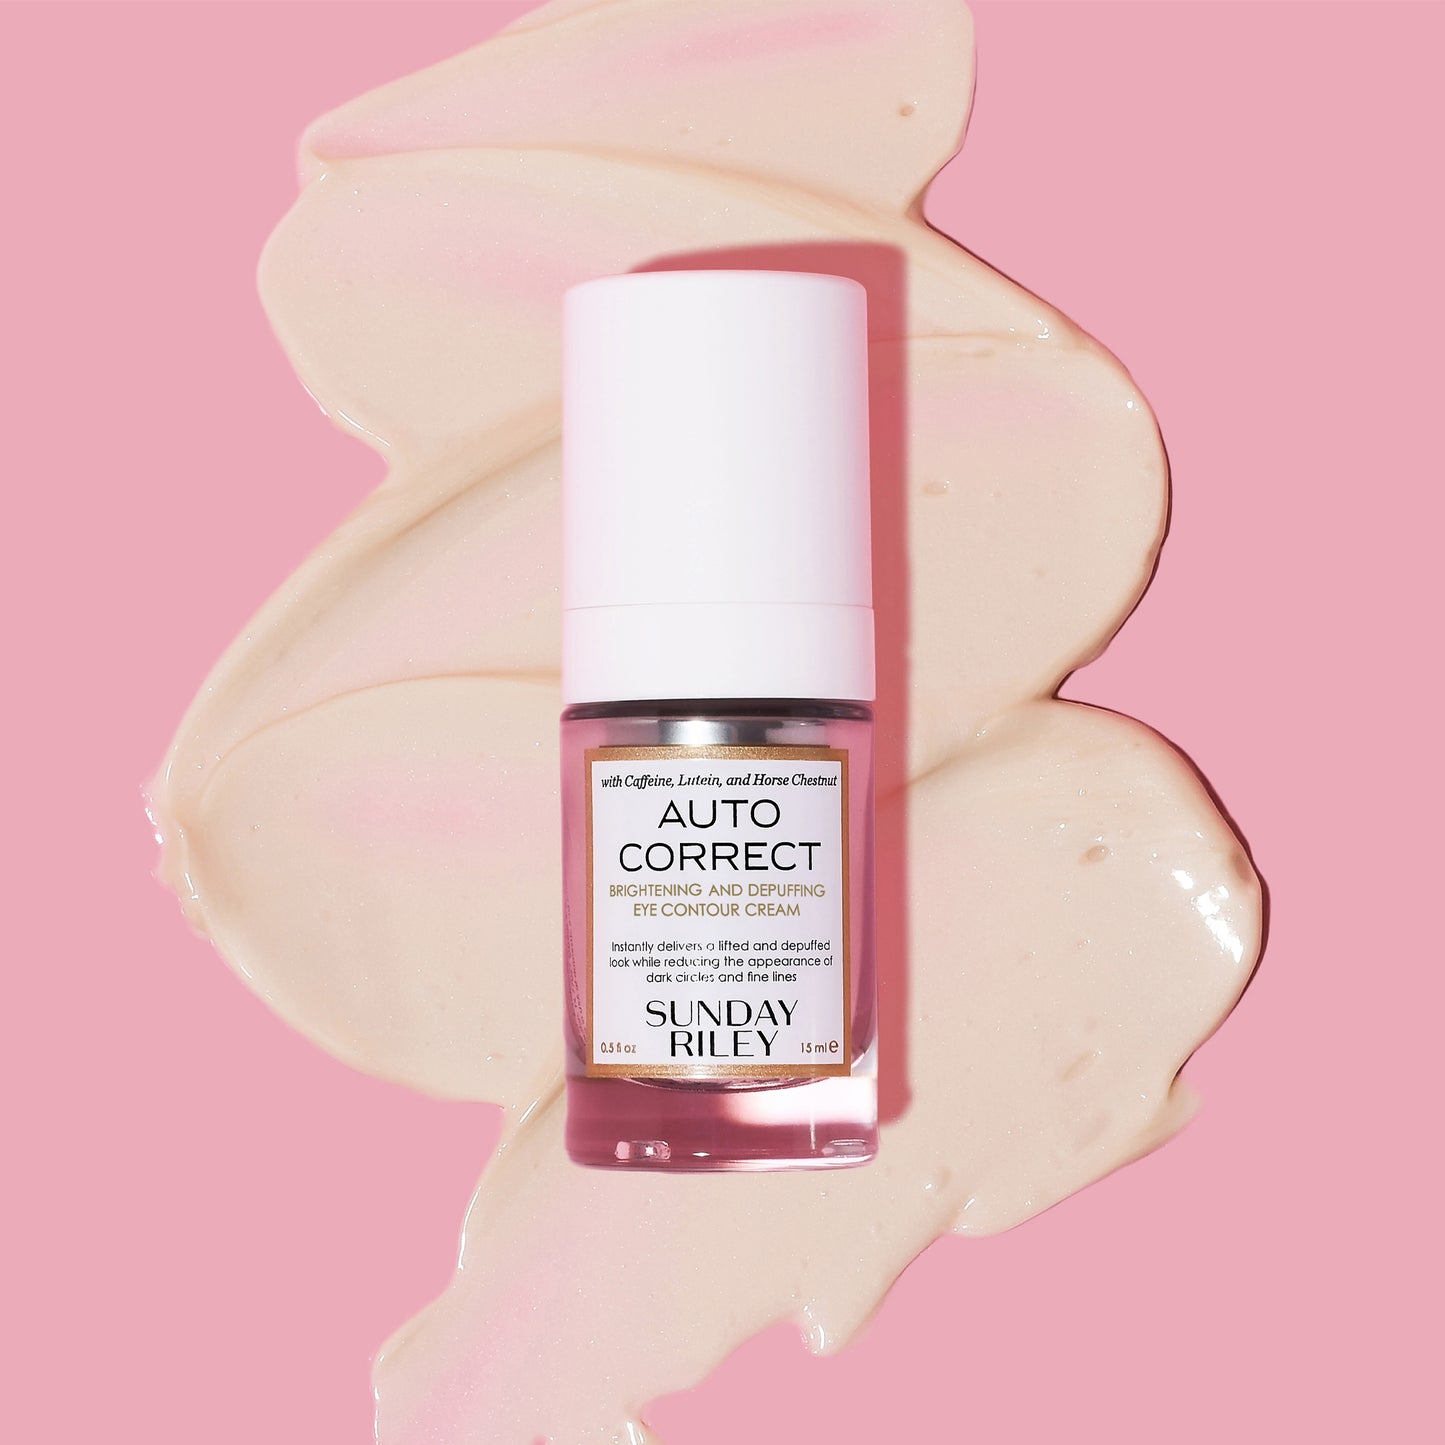 Auto Correct bottle lay down on goop with pink background